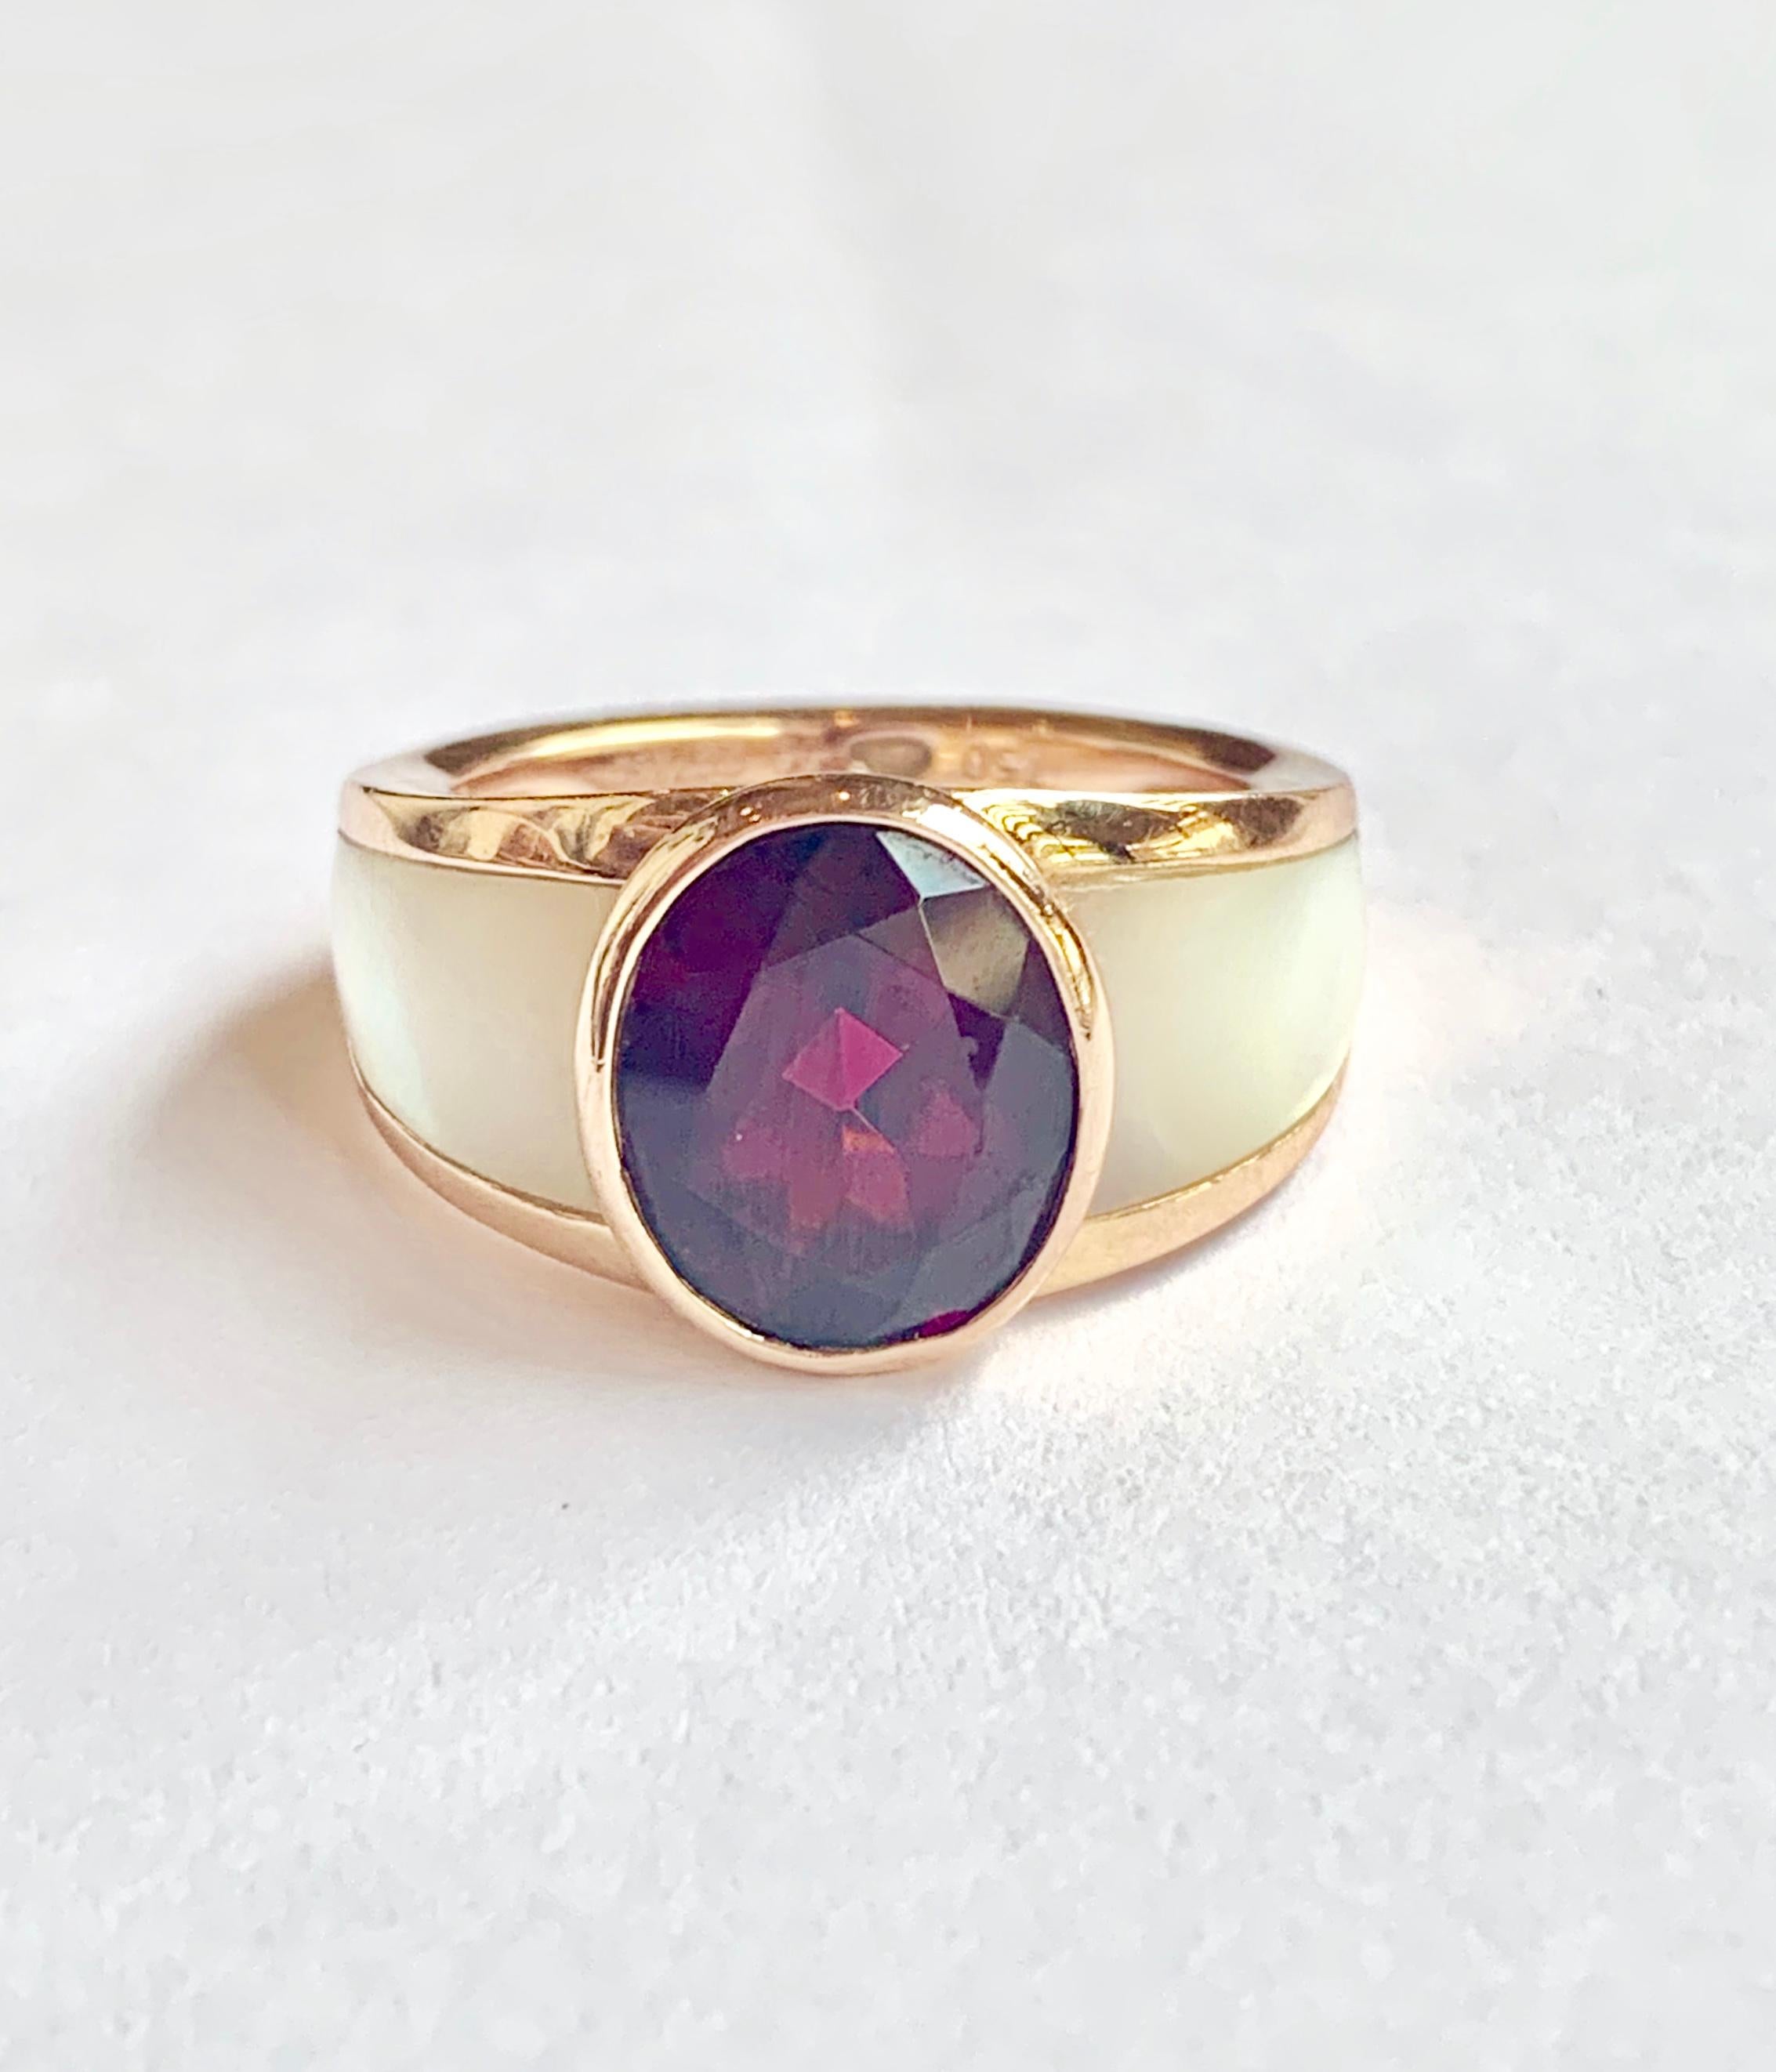 Beautiful Nadia ring, emblematic of Mauboussin jewelry.

18 carat pink gold, with a 3.5 carats oval cut rhodolite (garnet)  and white mother-of-pearl.

Very Good condition but a few tiny scratches on the stone.

Size of the ring : 55 (FR) / 7.5